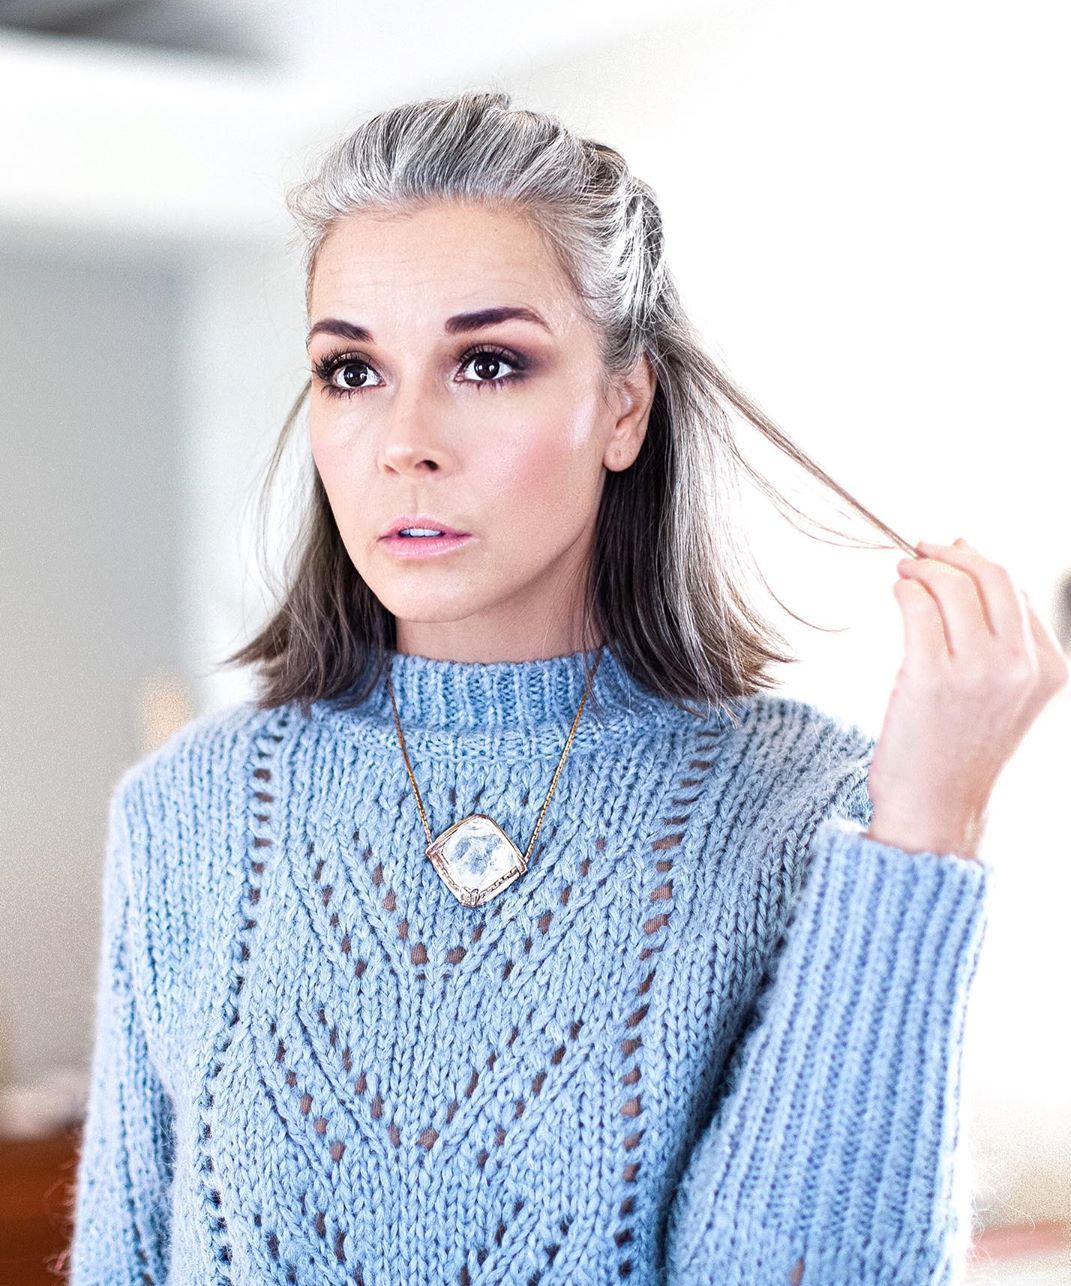 10 Best Shampoos for Gray Hair to Make Your Silver Strands Shine